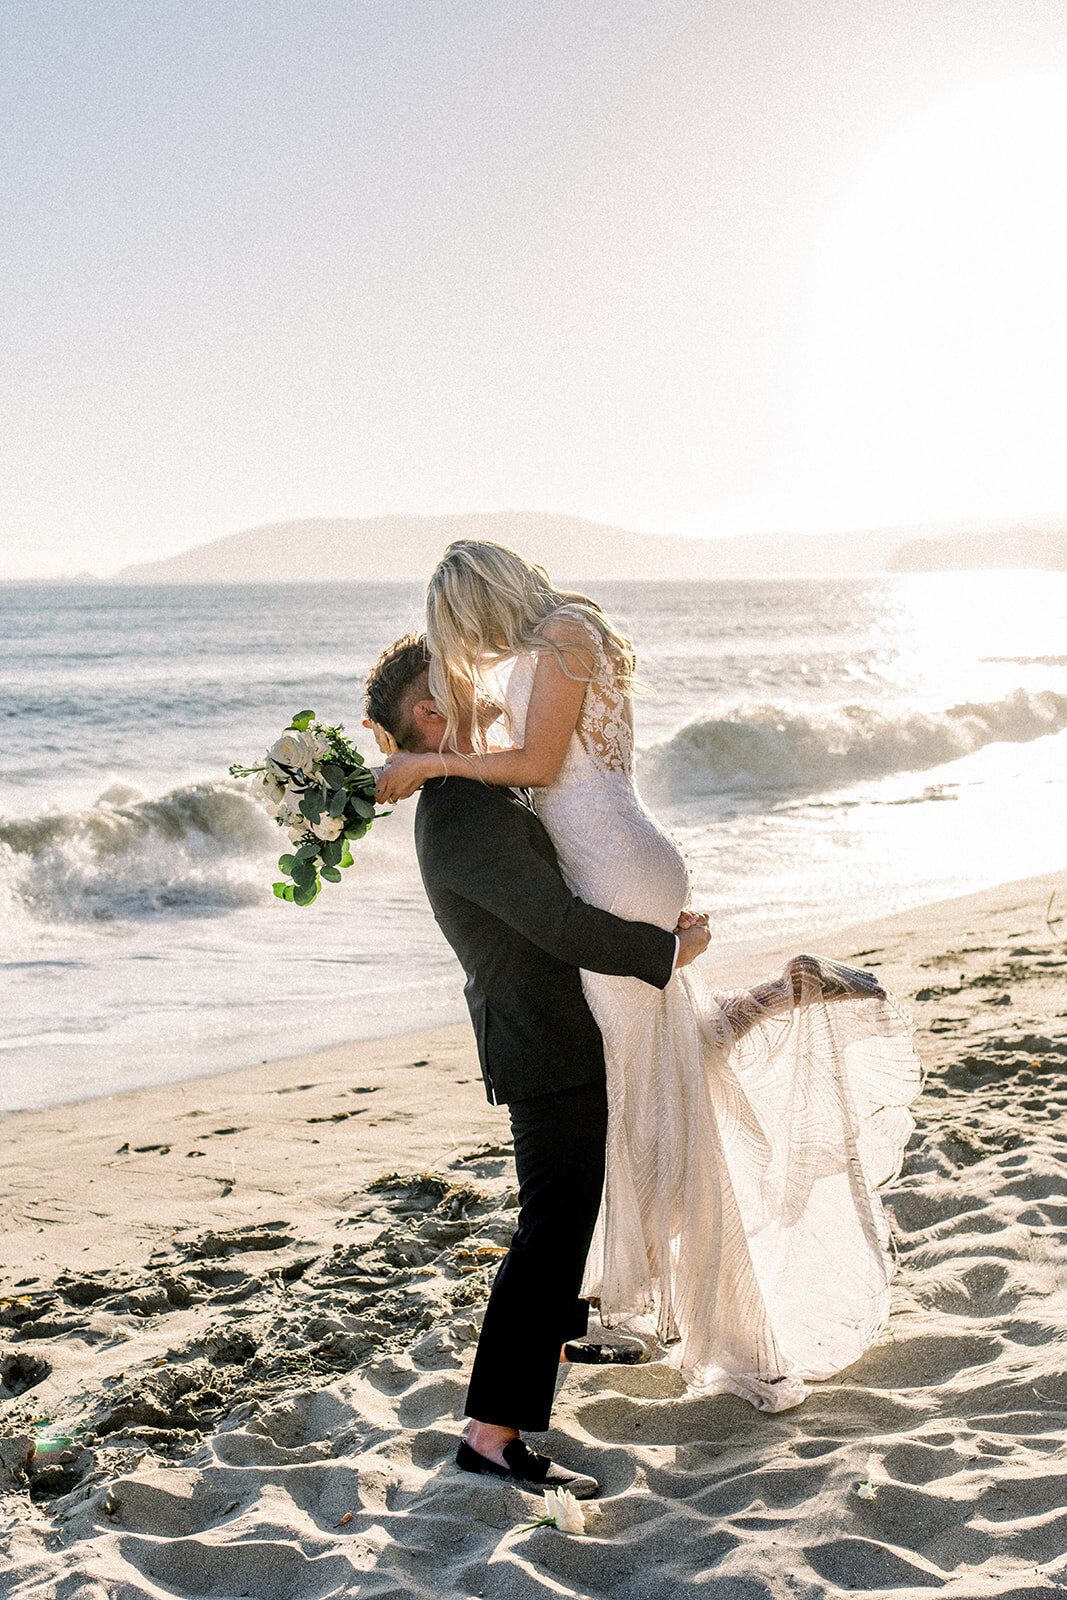 Groom lifting bride on the beach at Dolphin Bay Resort wedding in Pismo Beach, CA